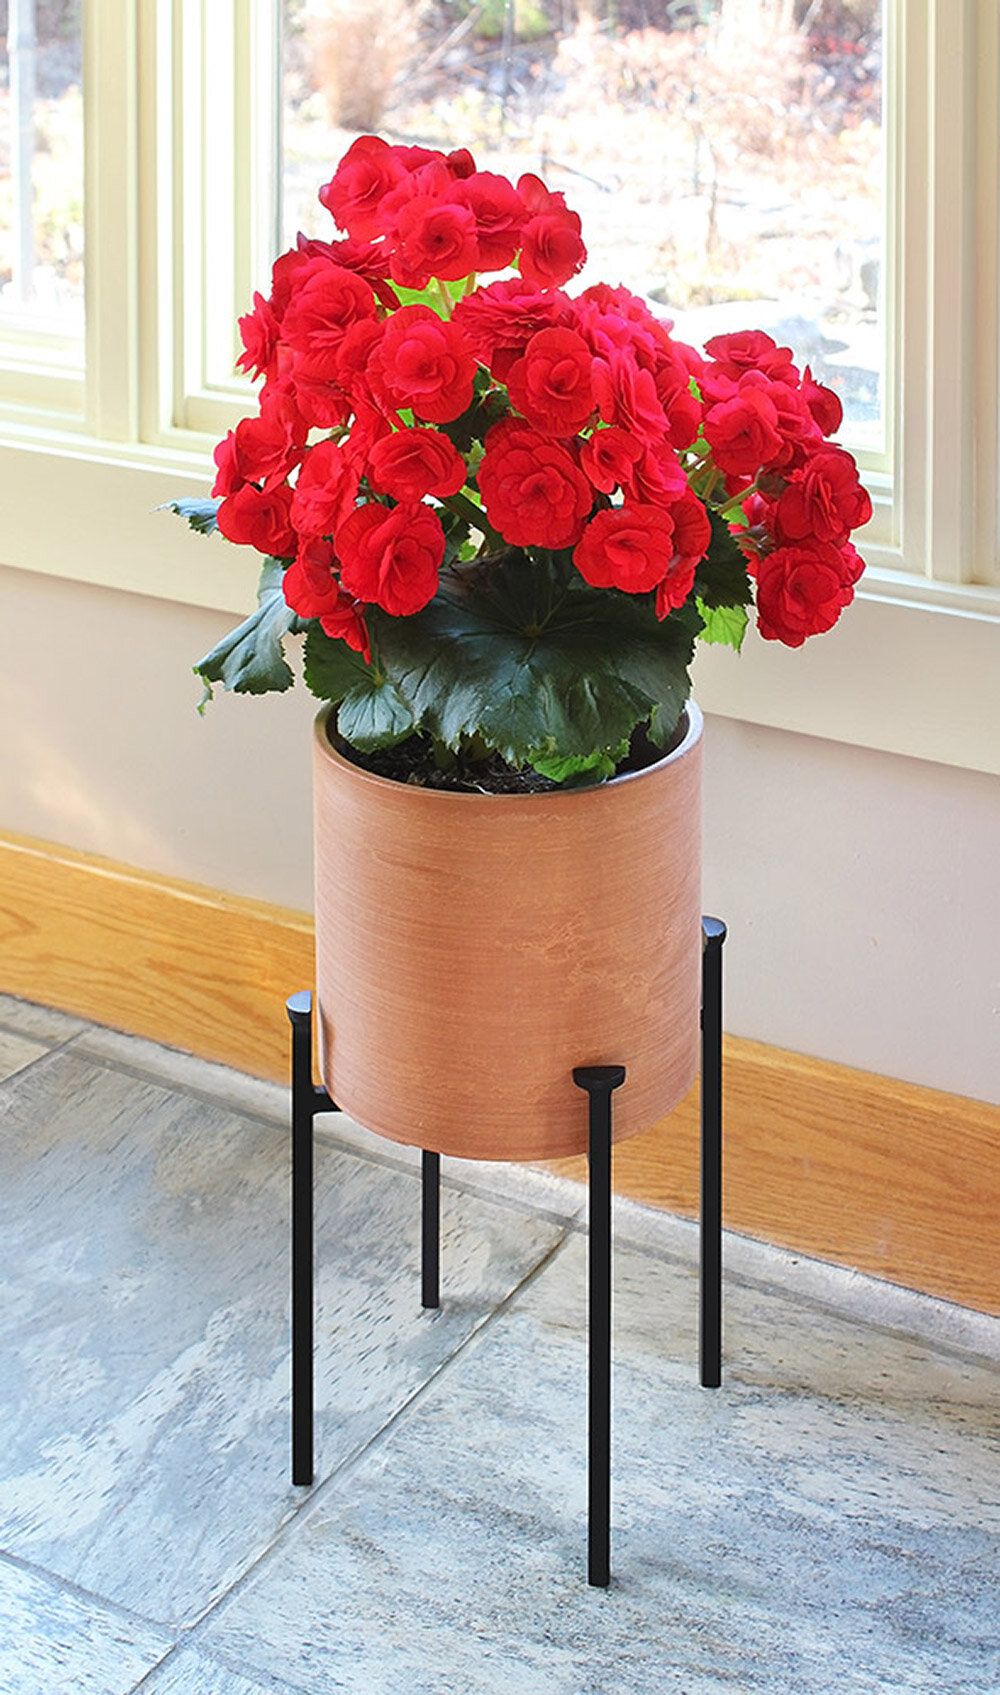 Ebern Designs Martamique Plant Stand & Reviews | Wayfair In Red Plant Stands (View 15 of 15)